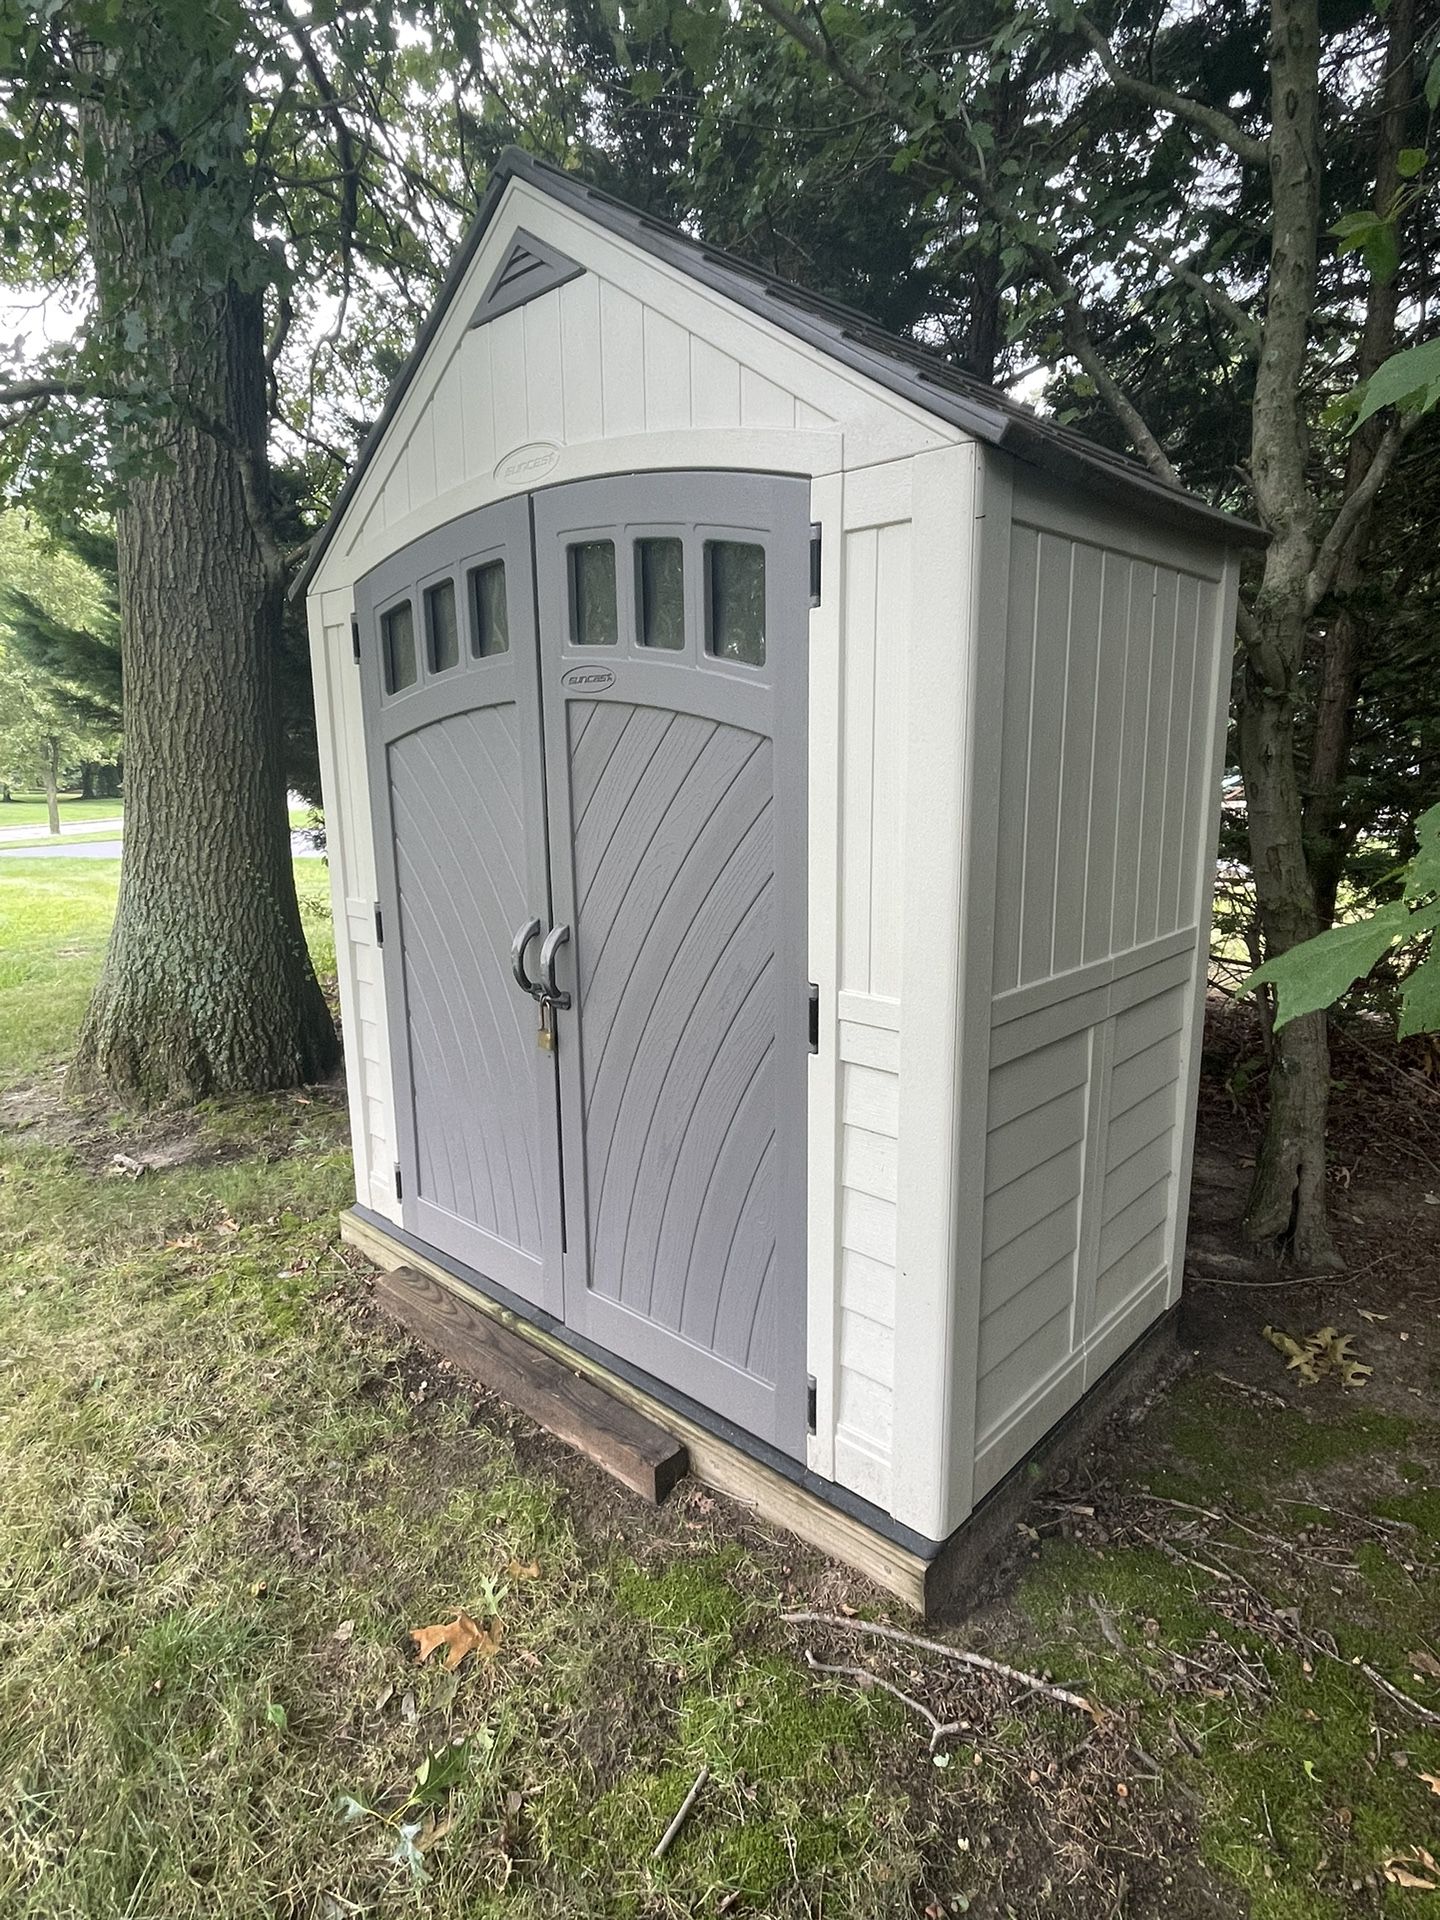 7’x4’ Suncast Shed With Wooden Platform